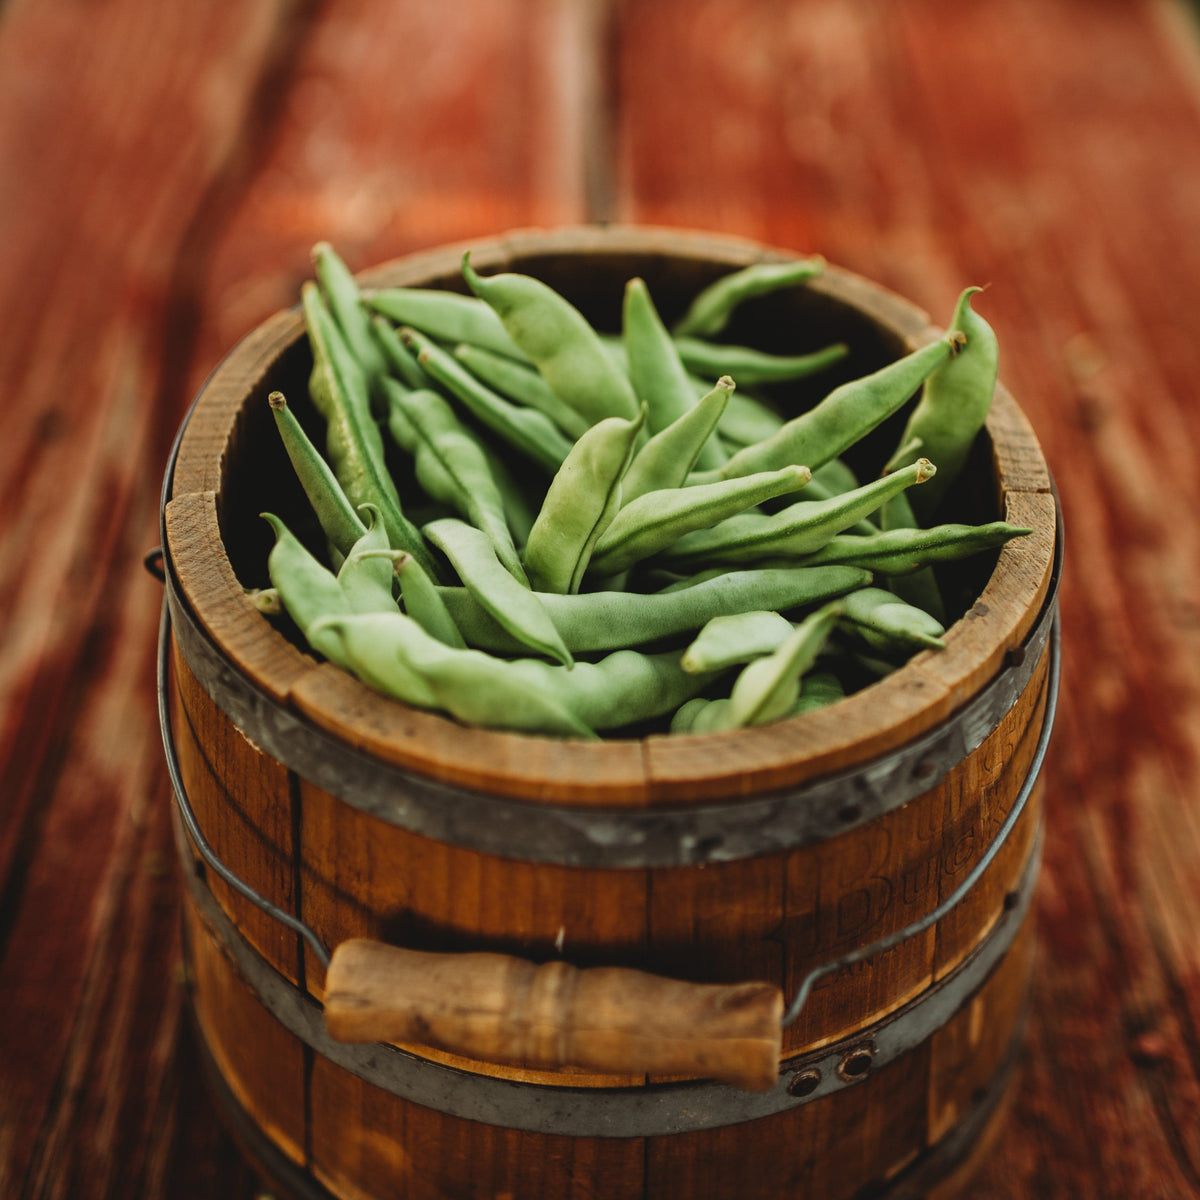 Granny (Tick, Old-Time Brown Stick, Leer) Pole Green Bean